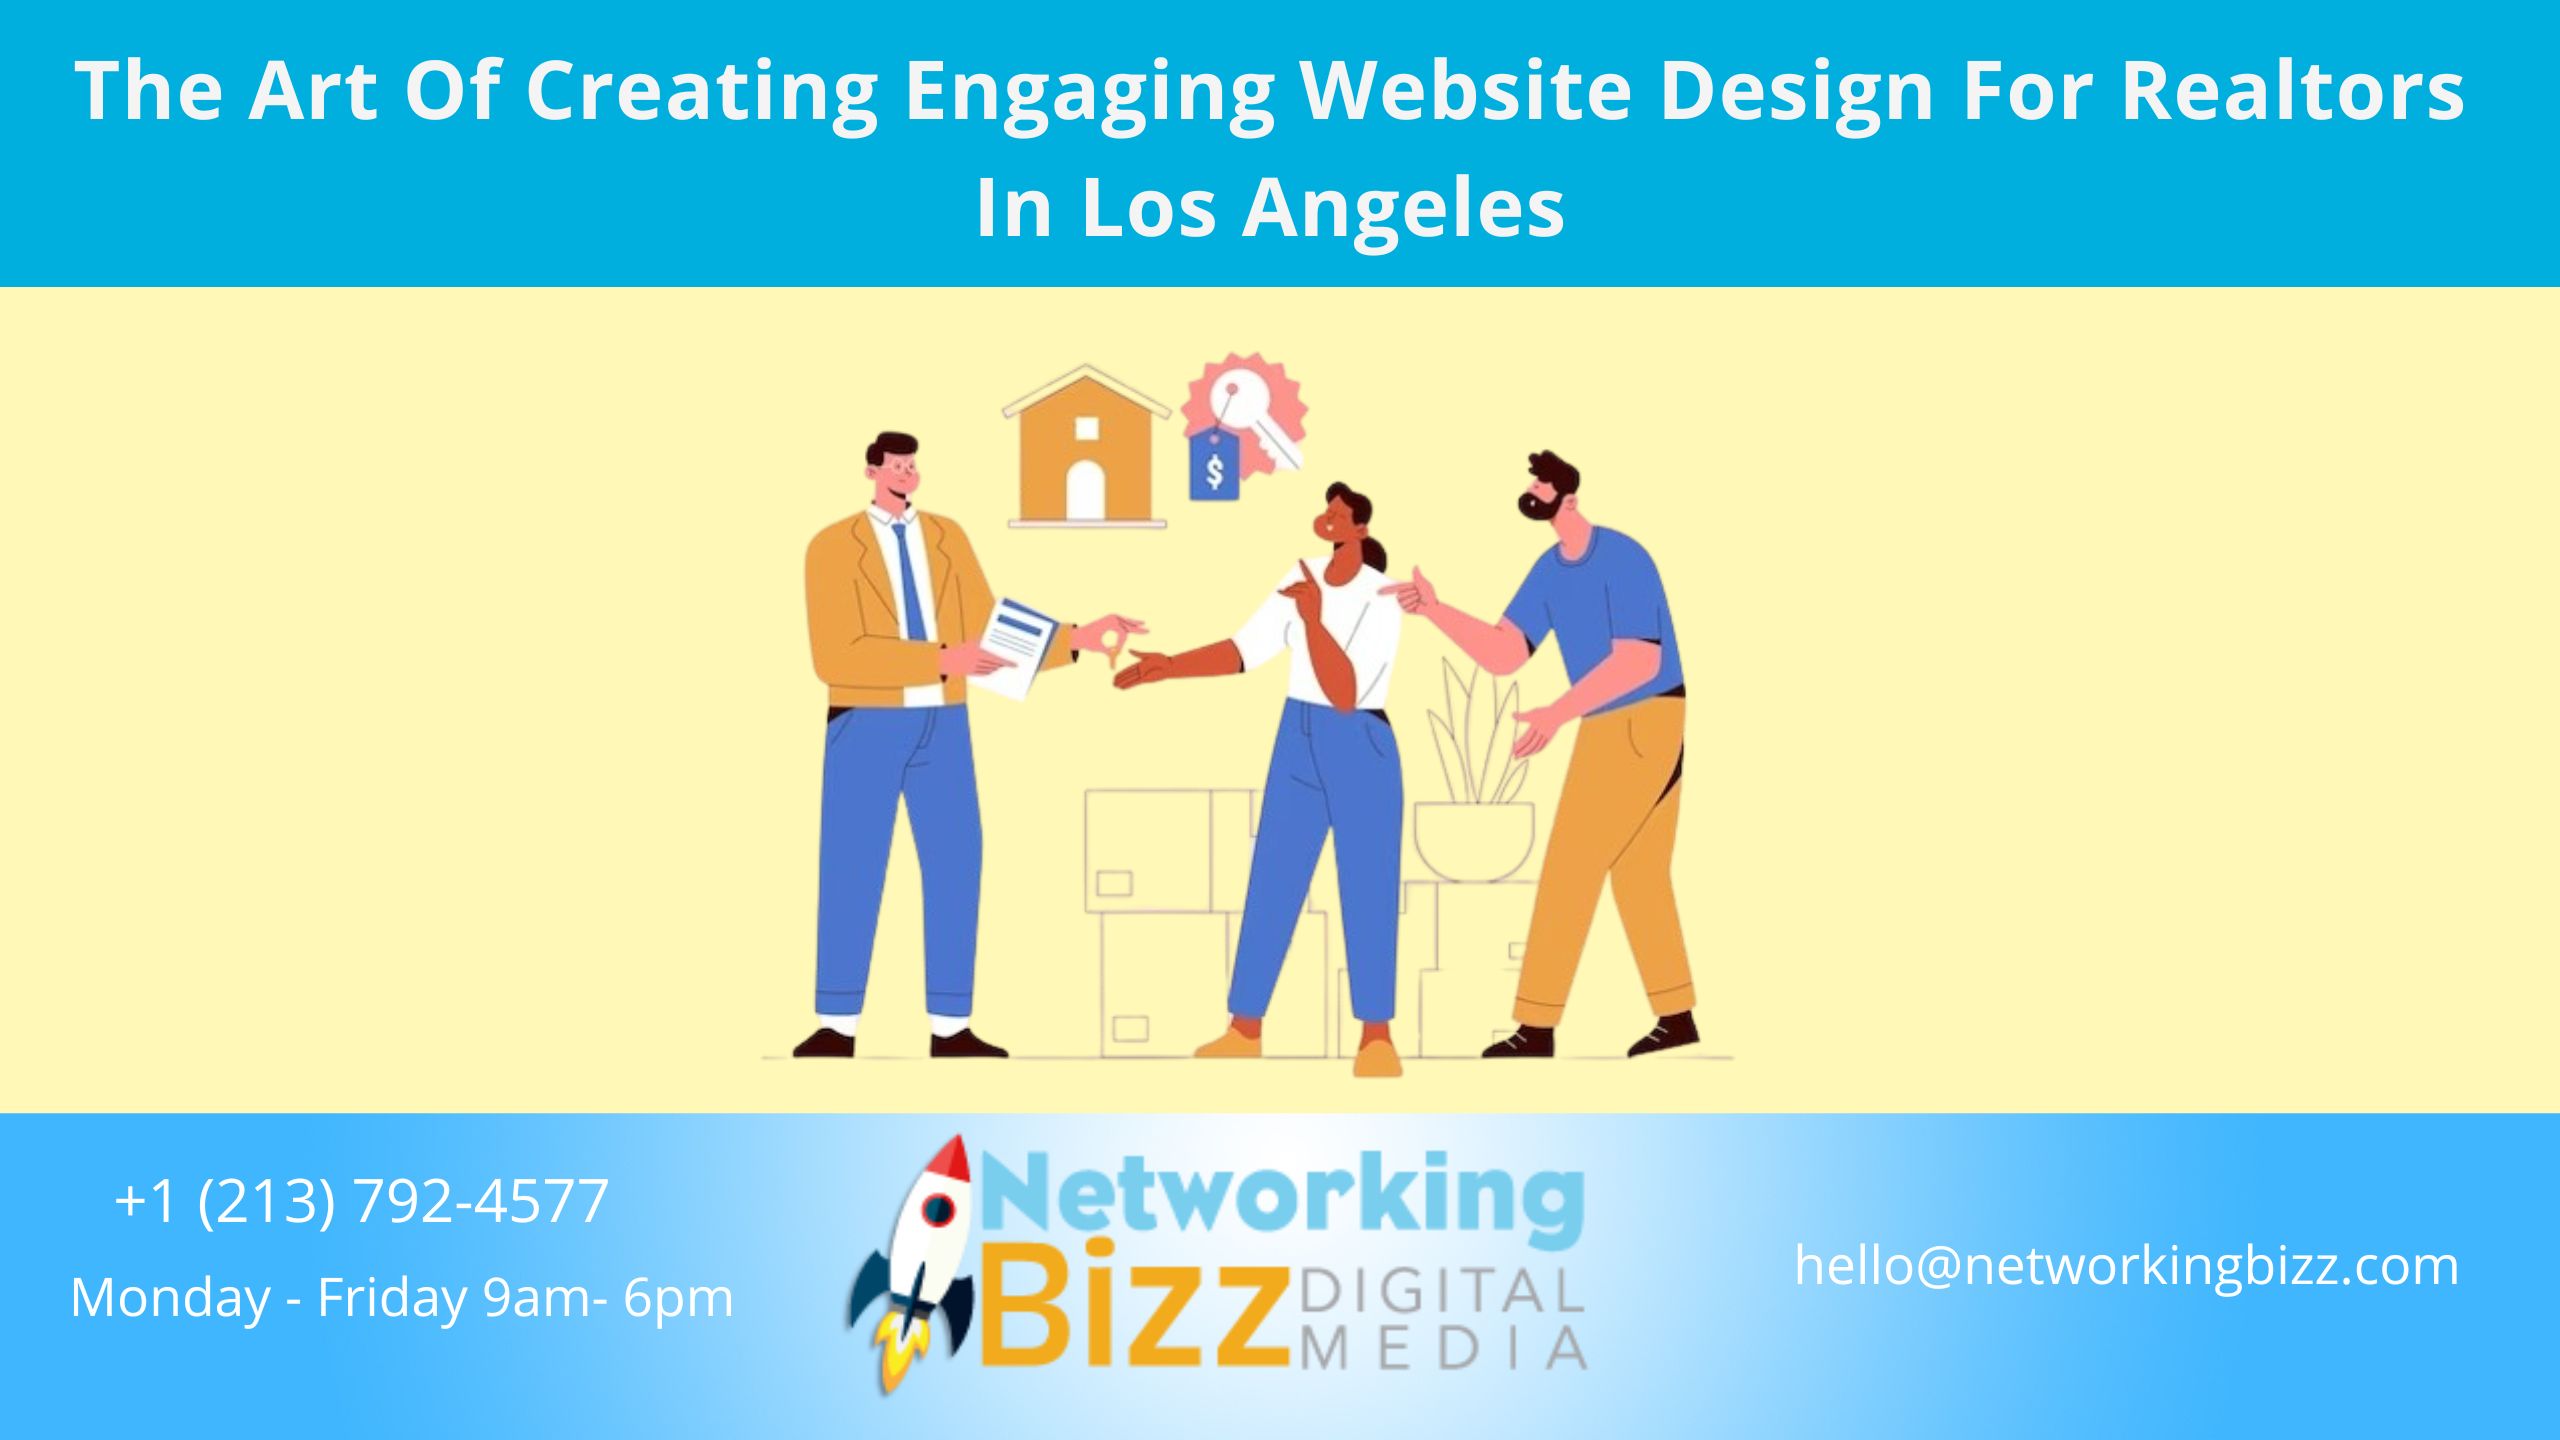 The Art Of Creating Engaging Website Design For Realtors In Los Angeles 